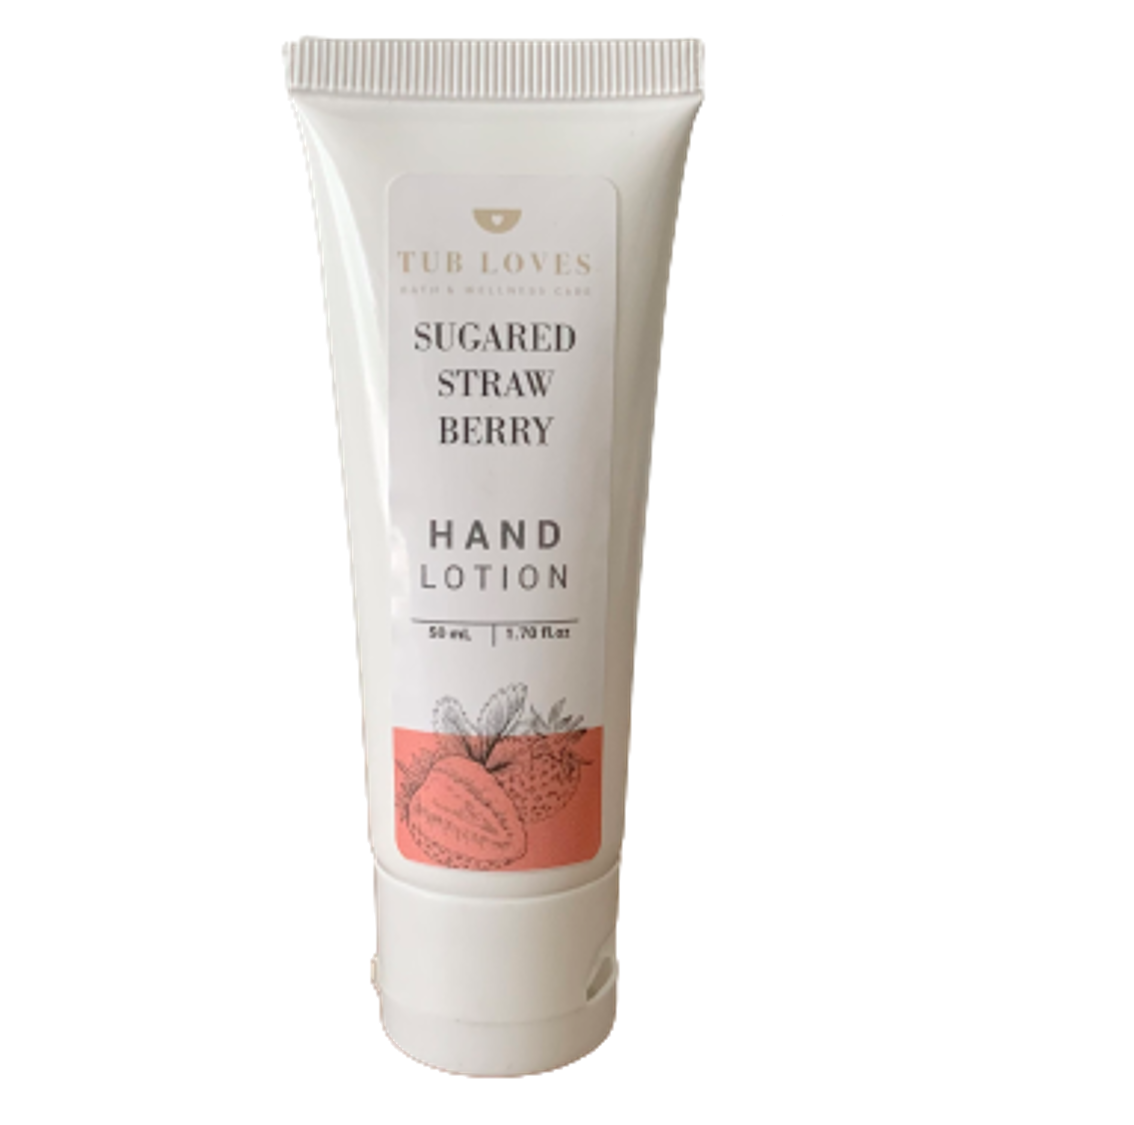 Sugared Strawberry - Hand Lotion